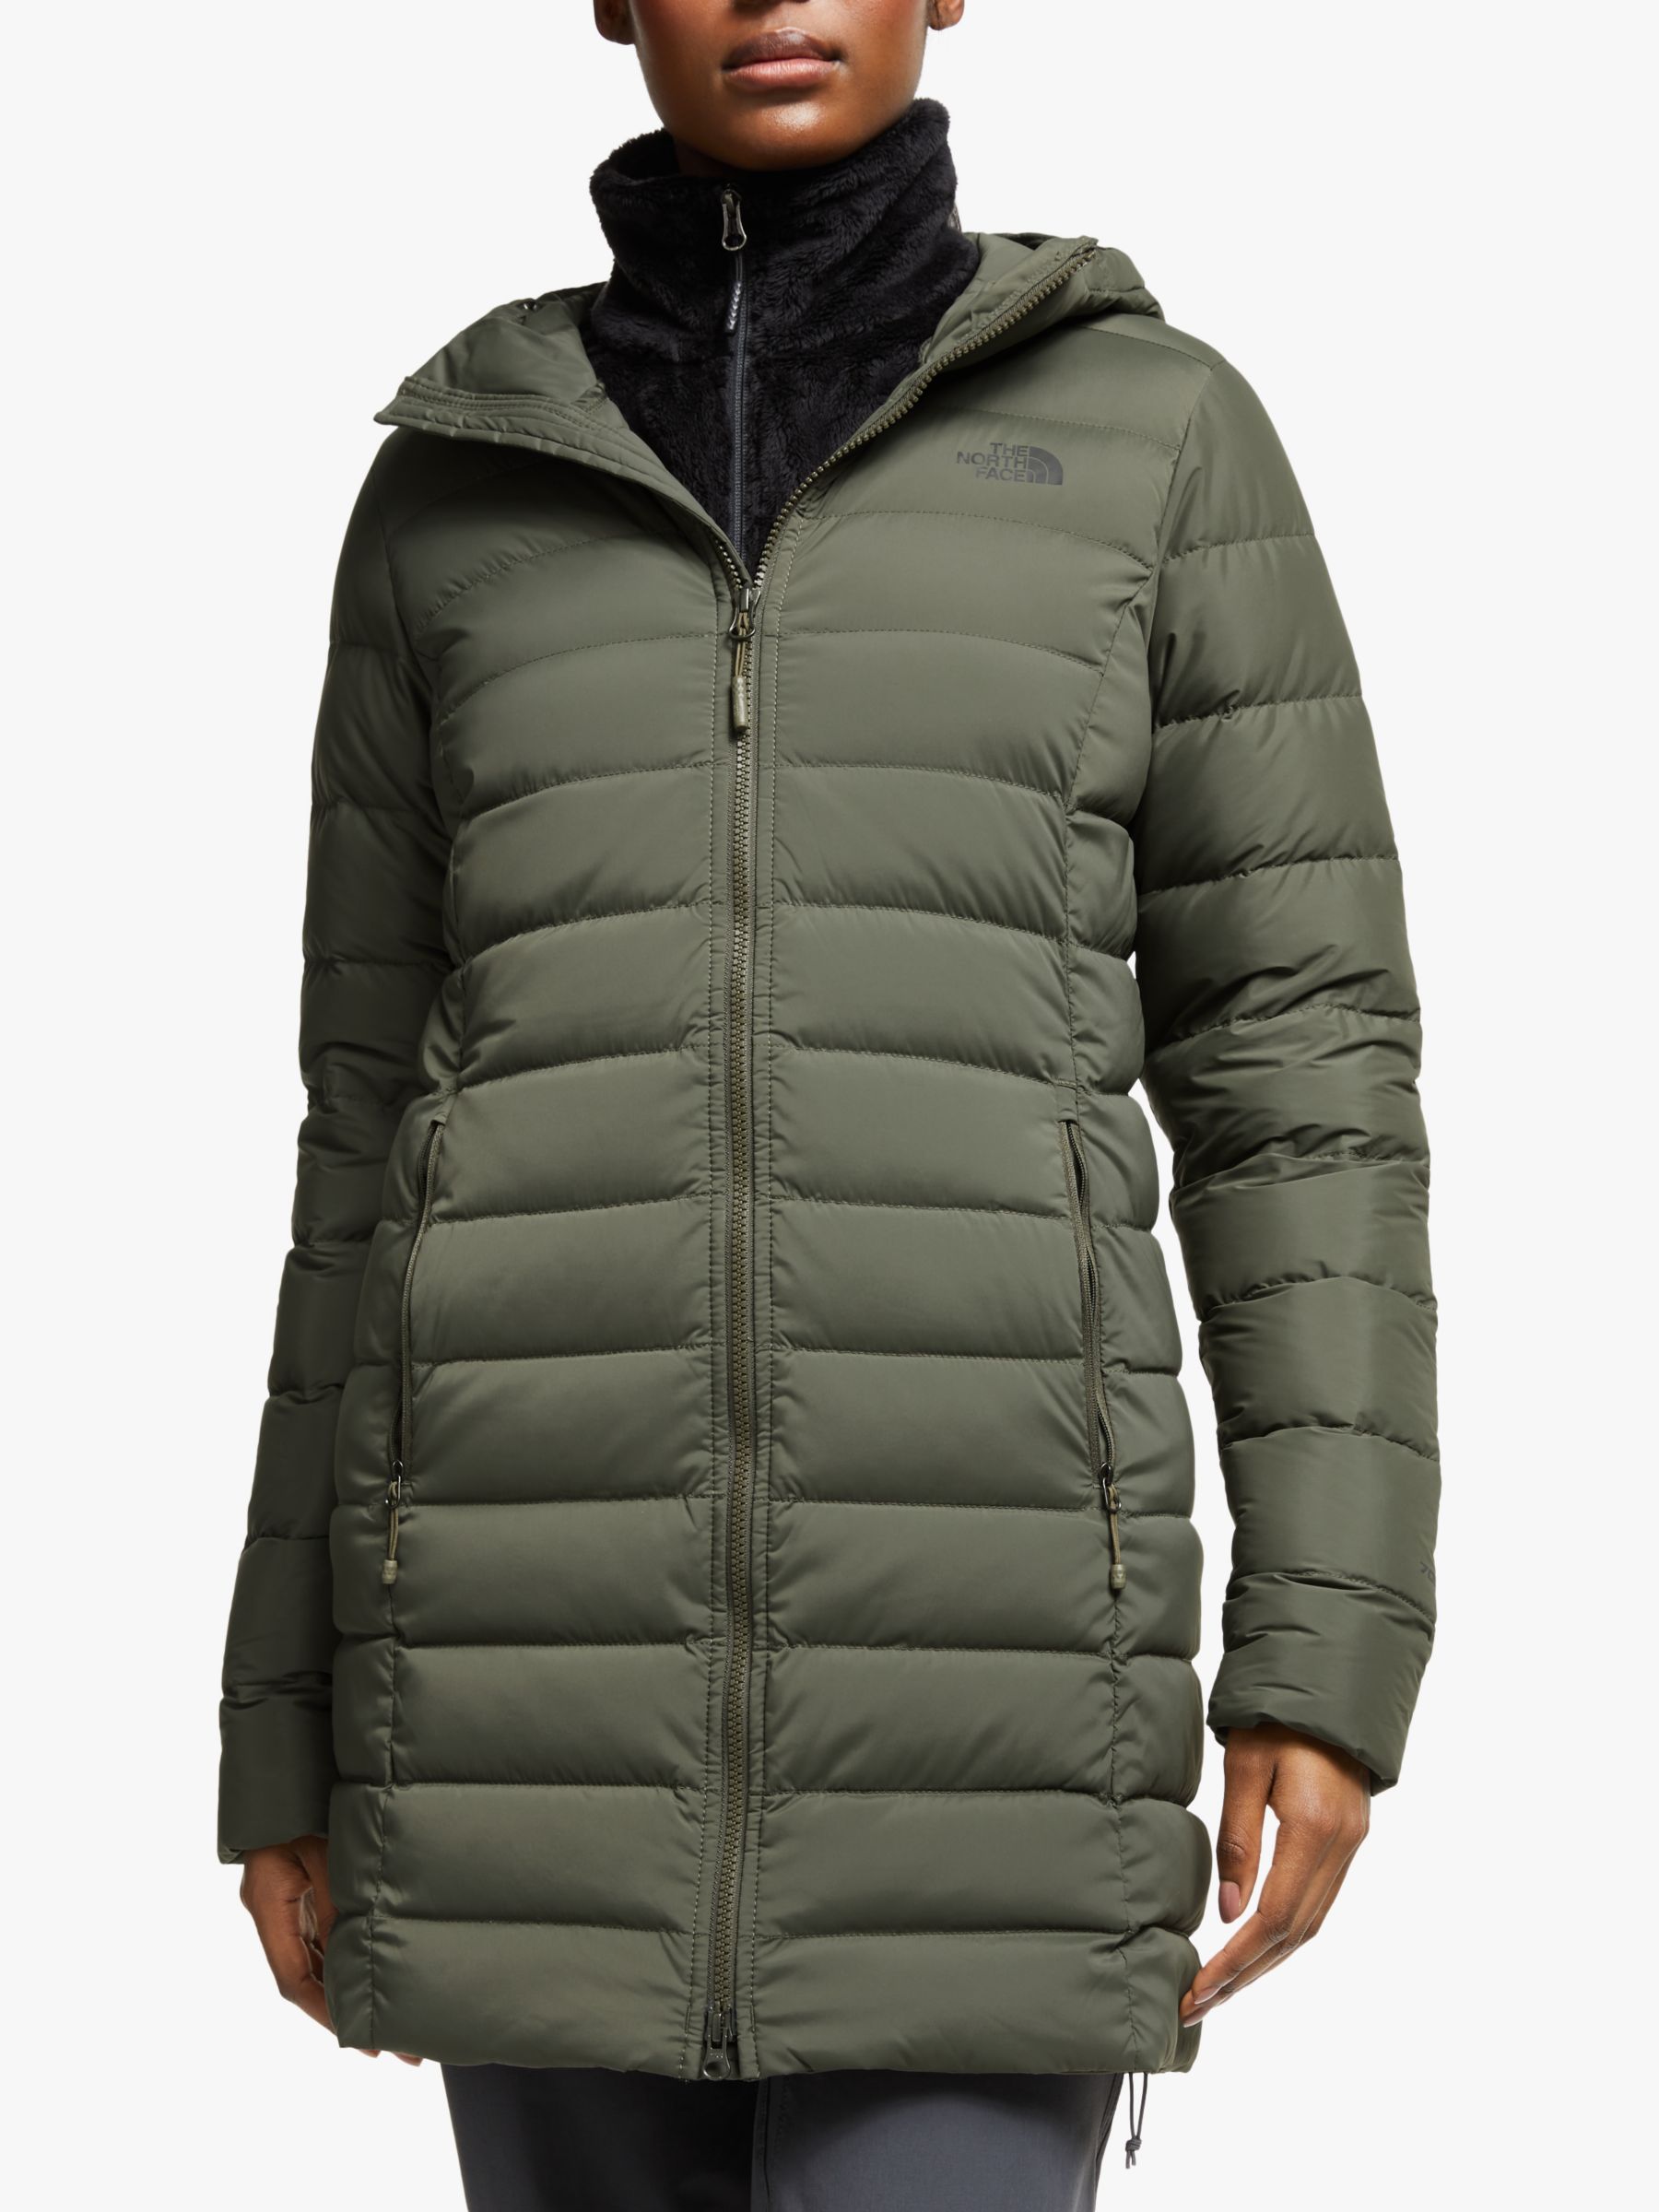 The North Face Women's Parka Jacket | New Taupe Green at John Lewis ...